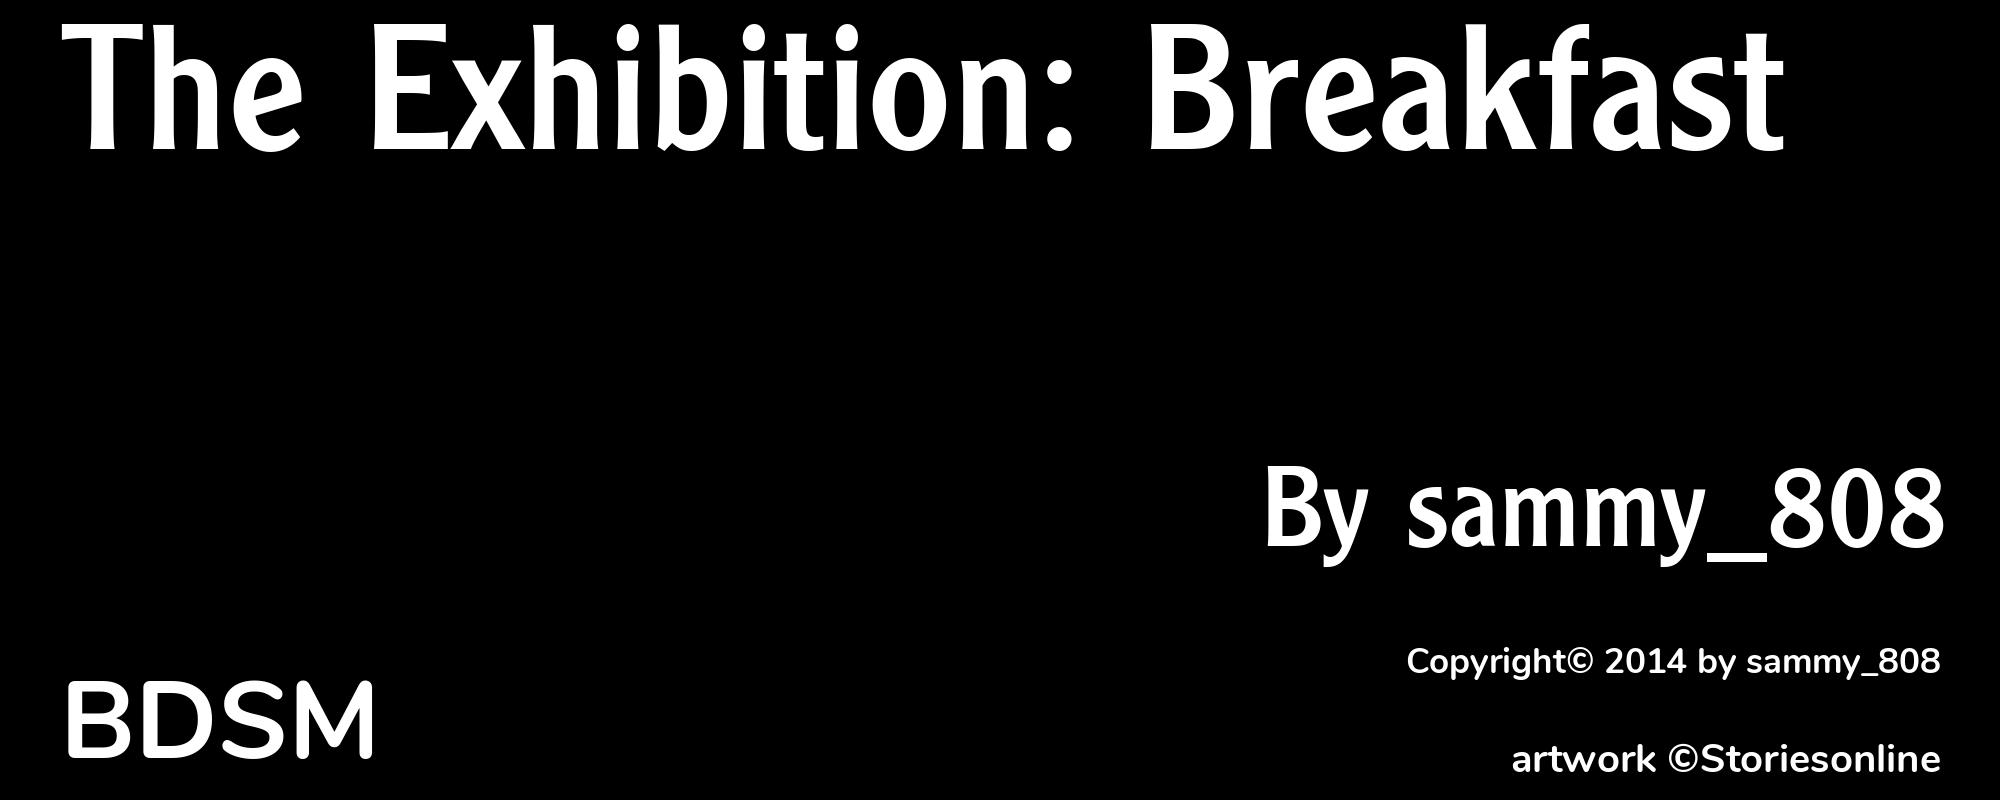 The Exhibition: Breakfast - Cover